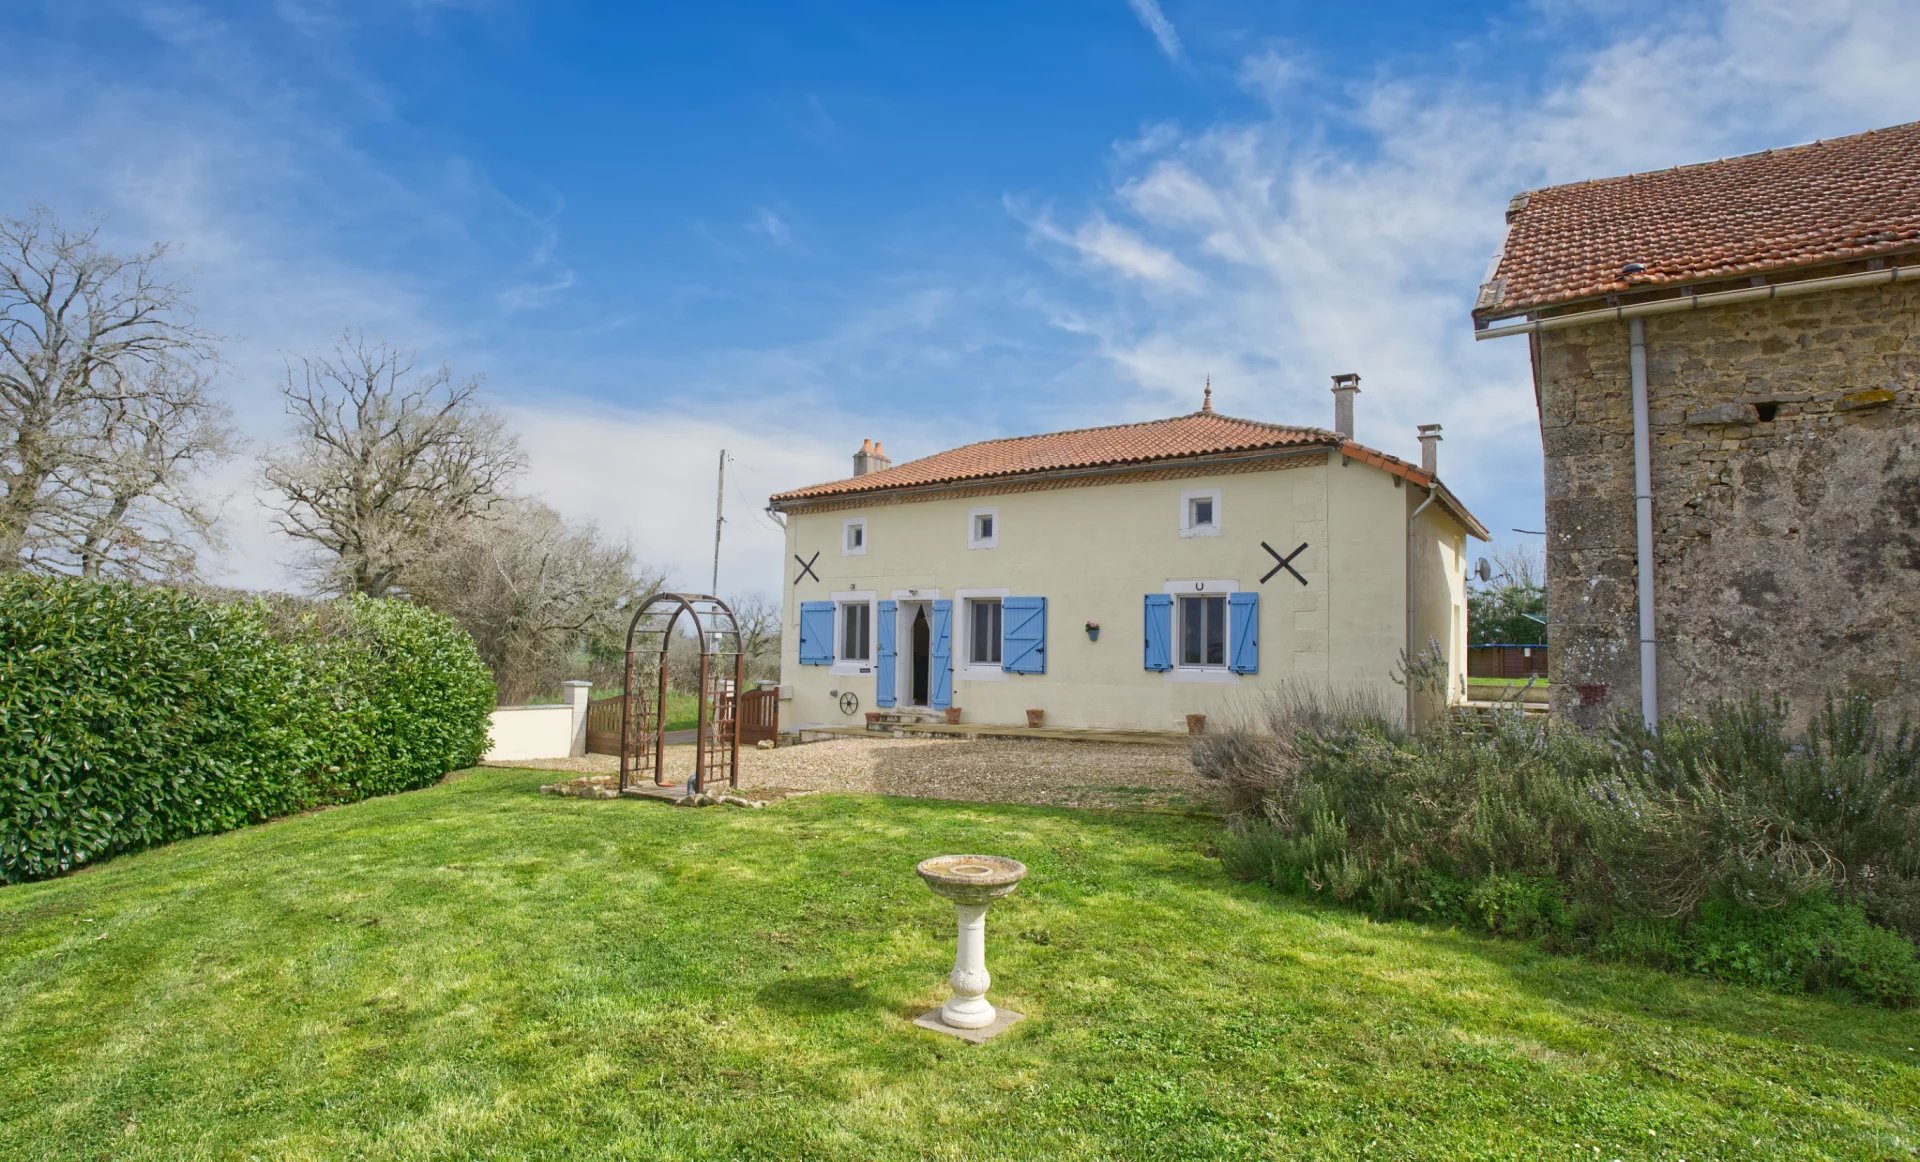 Pretty stone property in a quiet hamlet, 2 bedrooms, above-ground pool